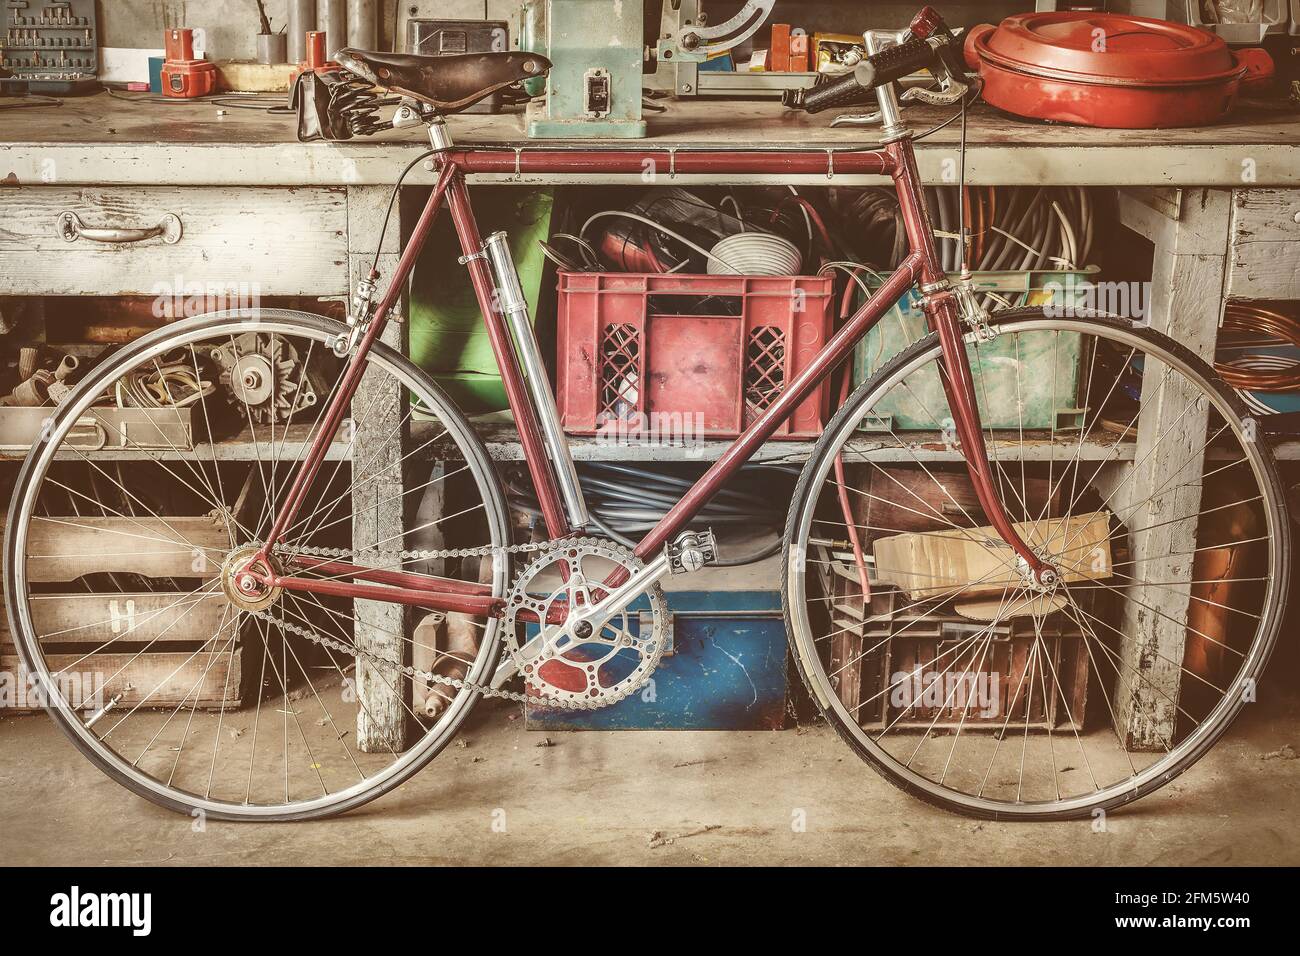 Vintage racing bycicle in front of an old work bench with tools in a garage Stock Photo